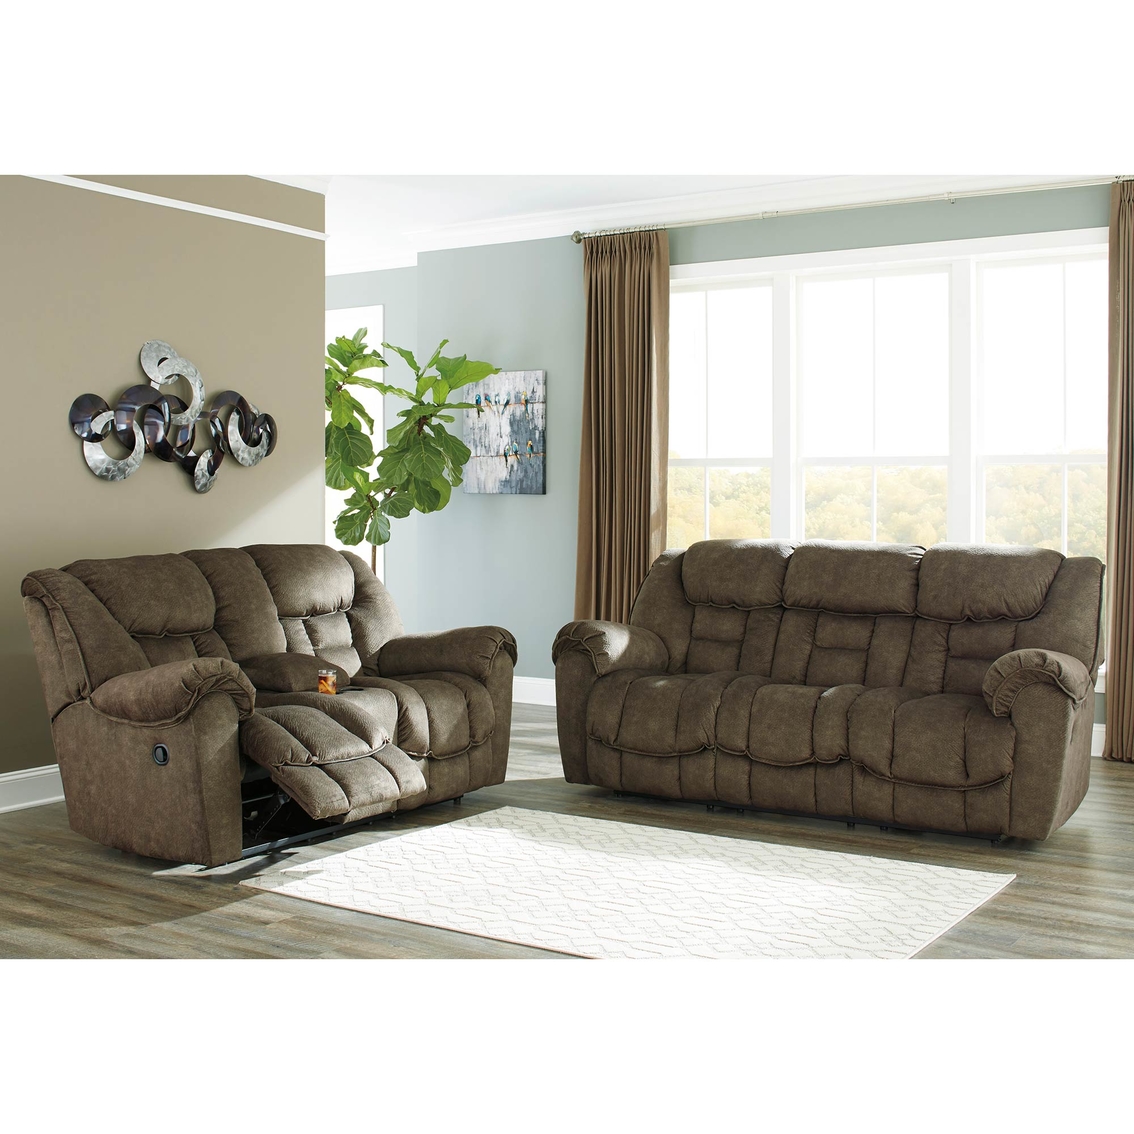 Signature Design By Ashley Capehorn Reclining Sofa And